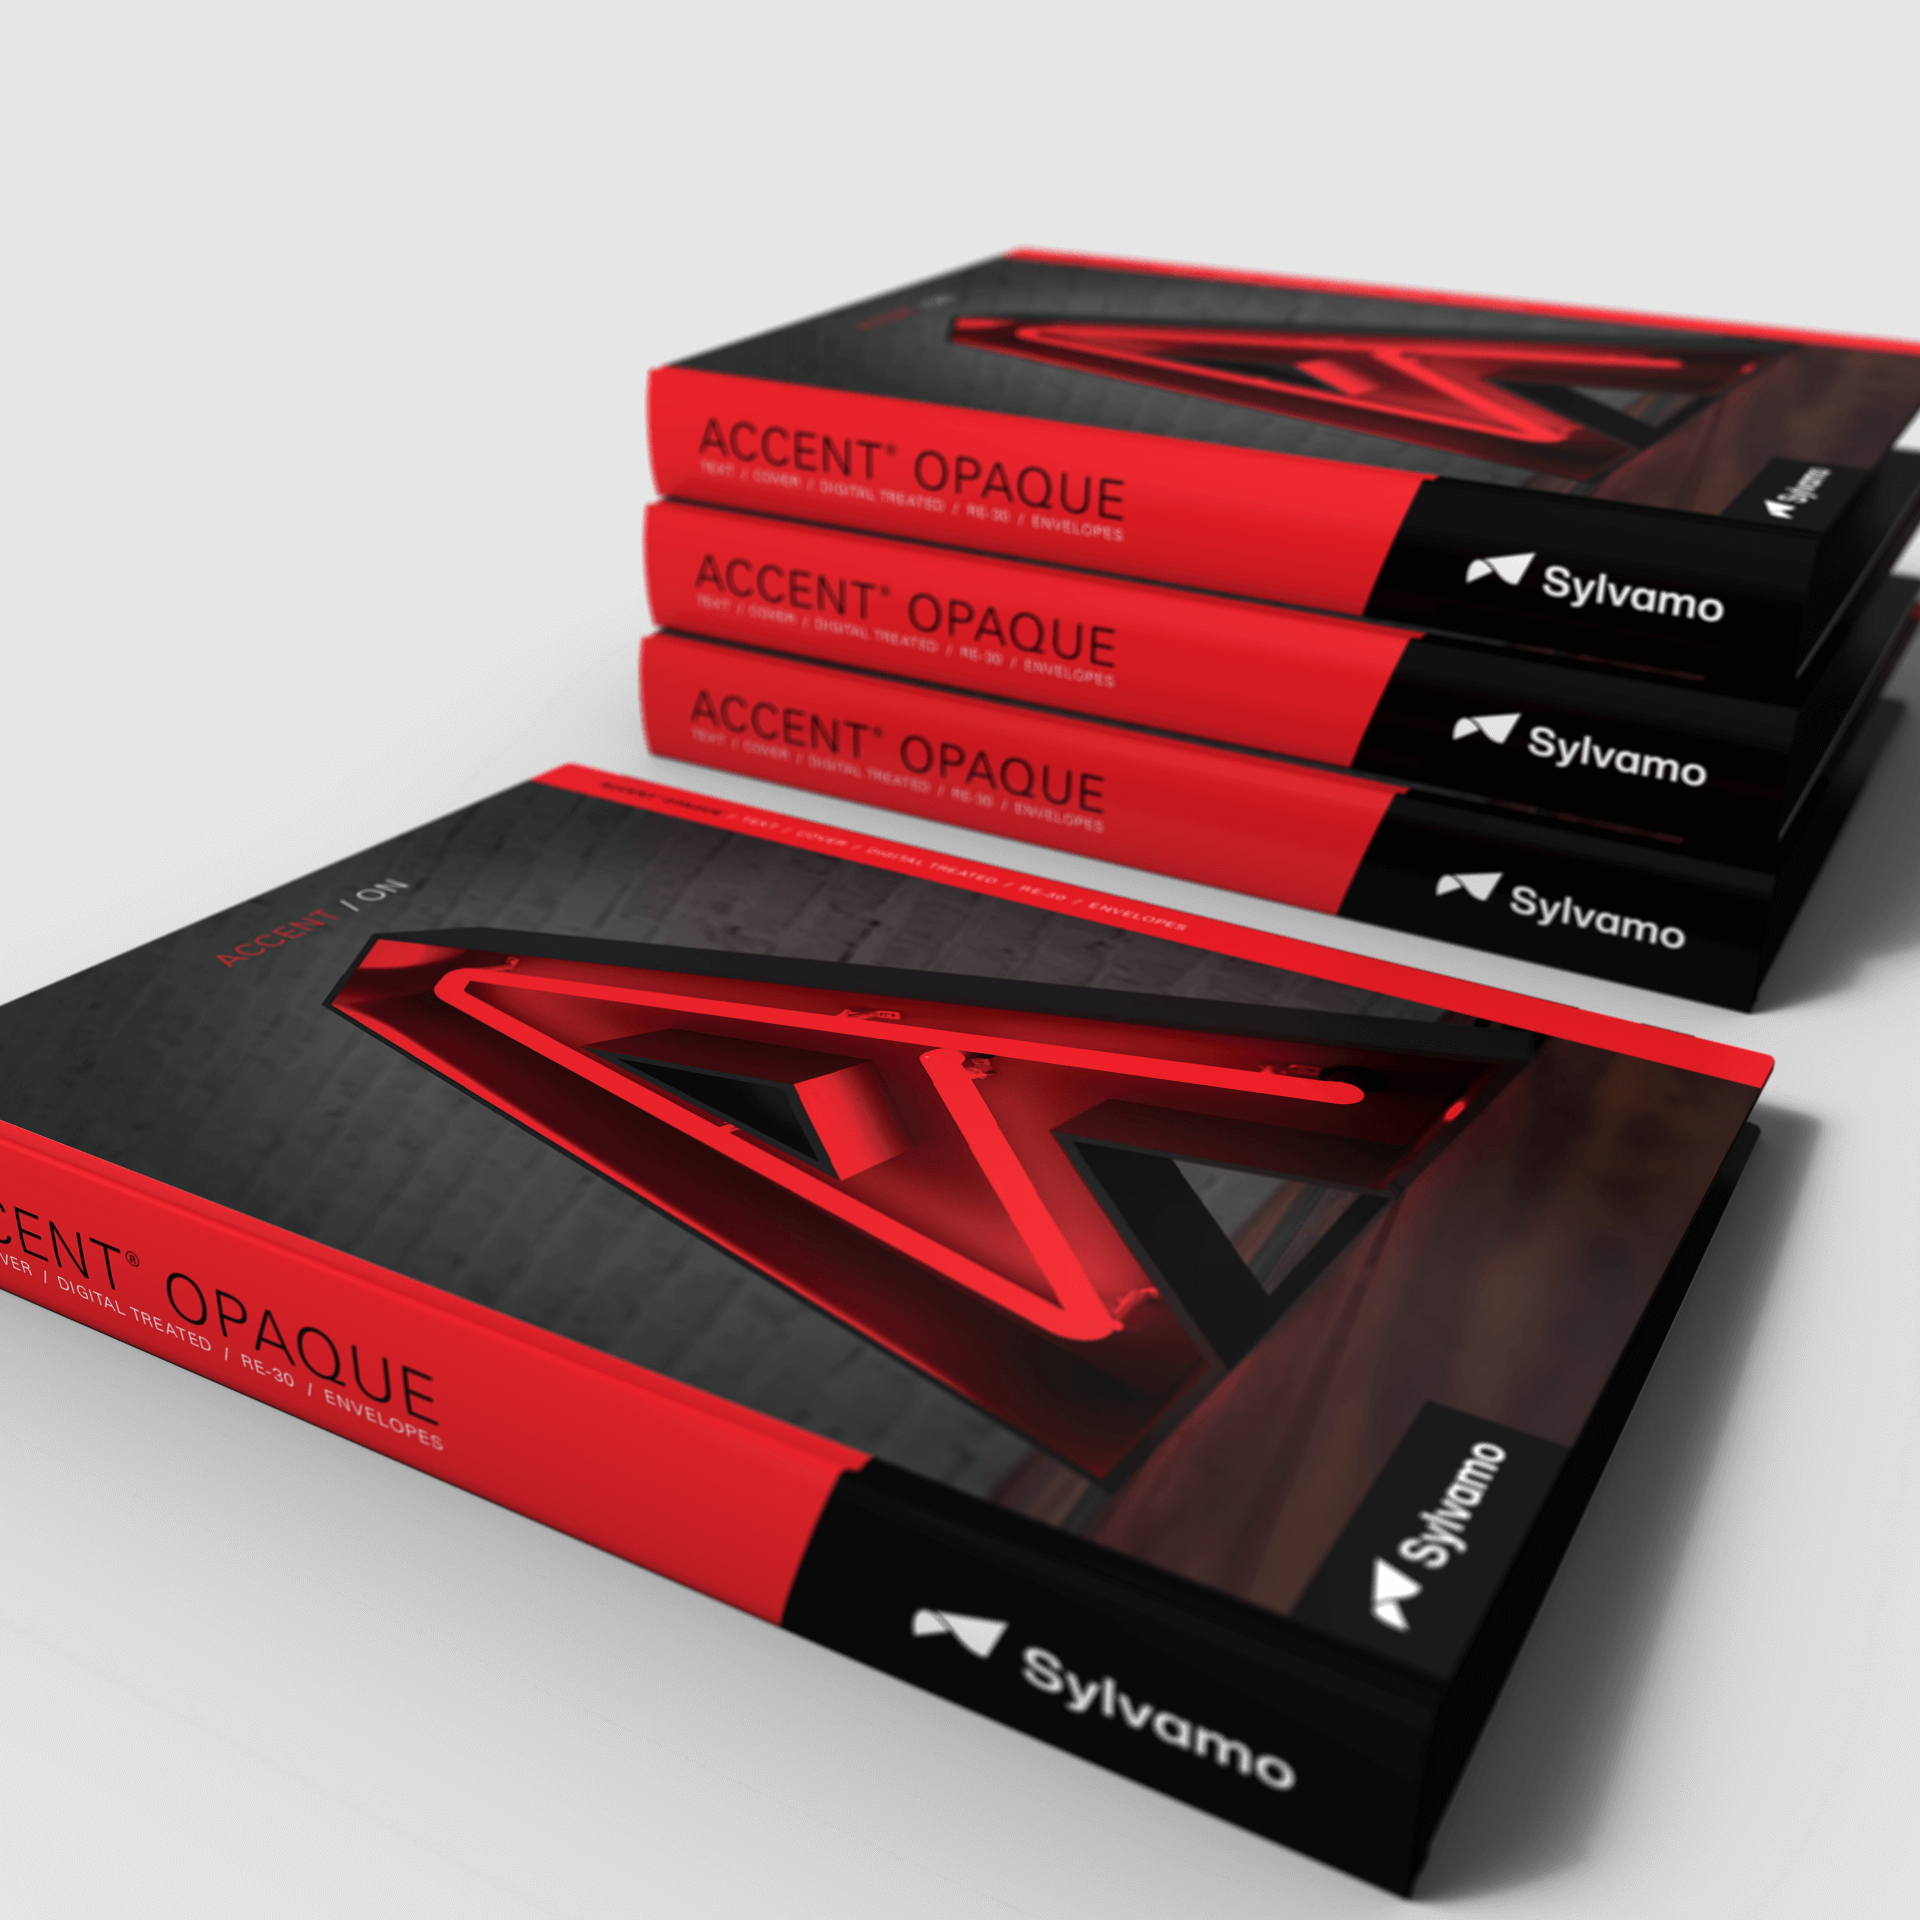 Stack of three Accent Opaque swatchbooks with one book laying flat in front of them